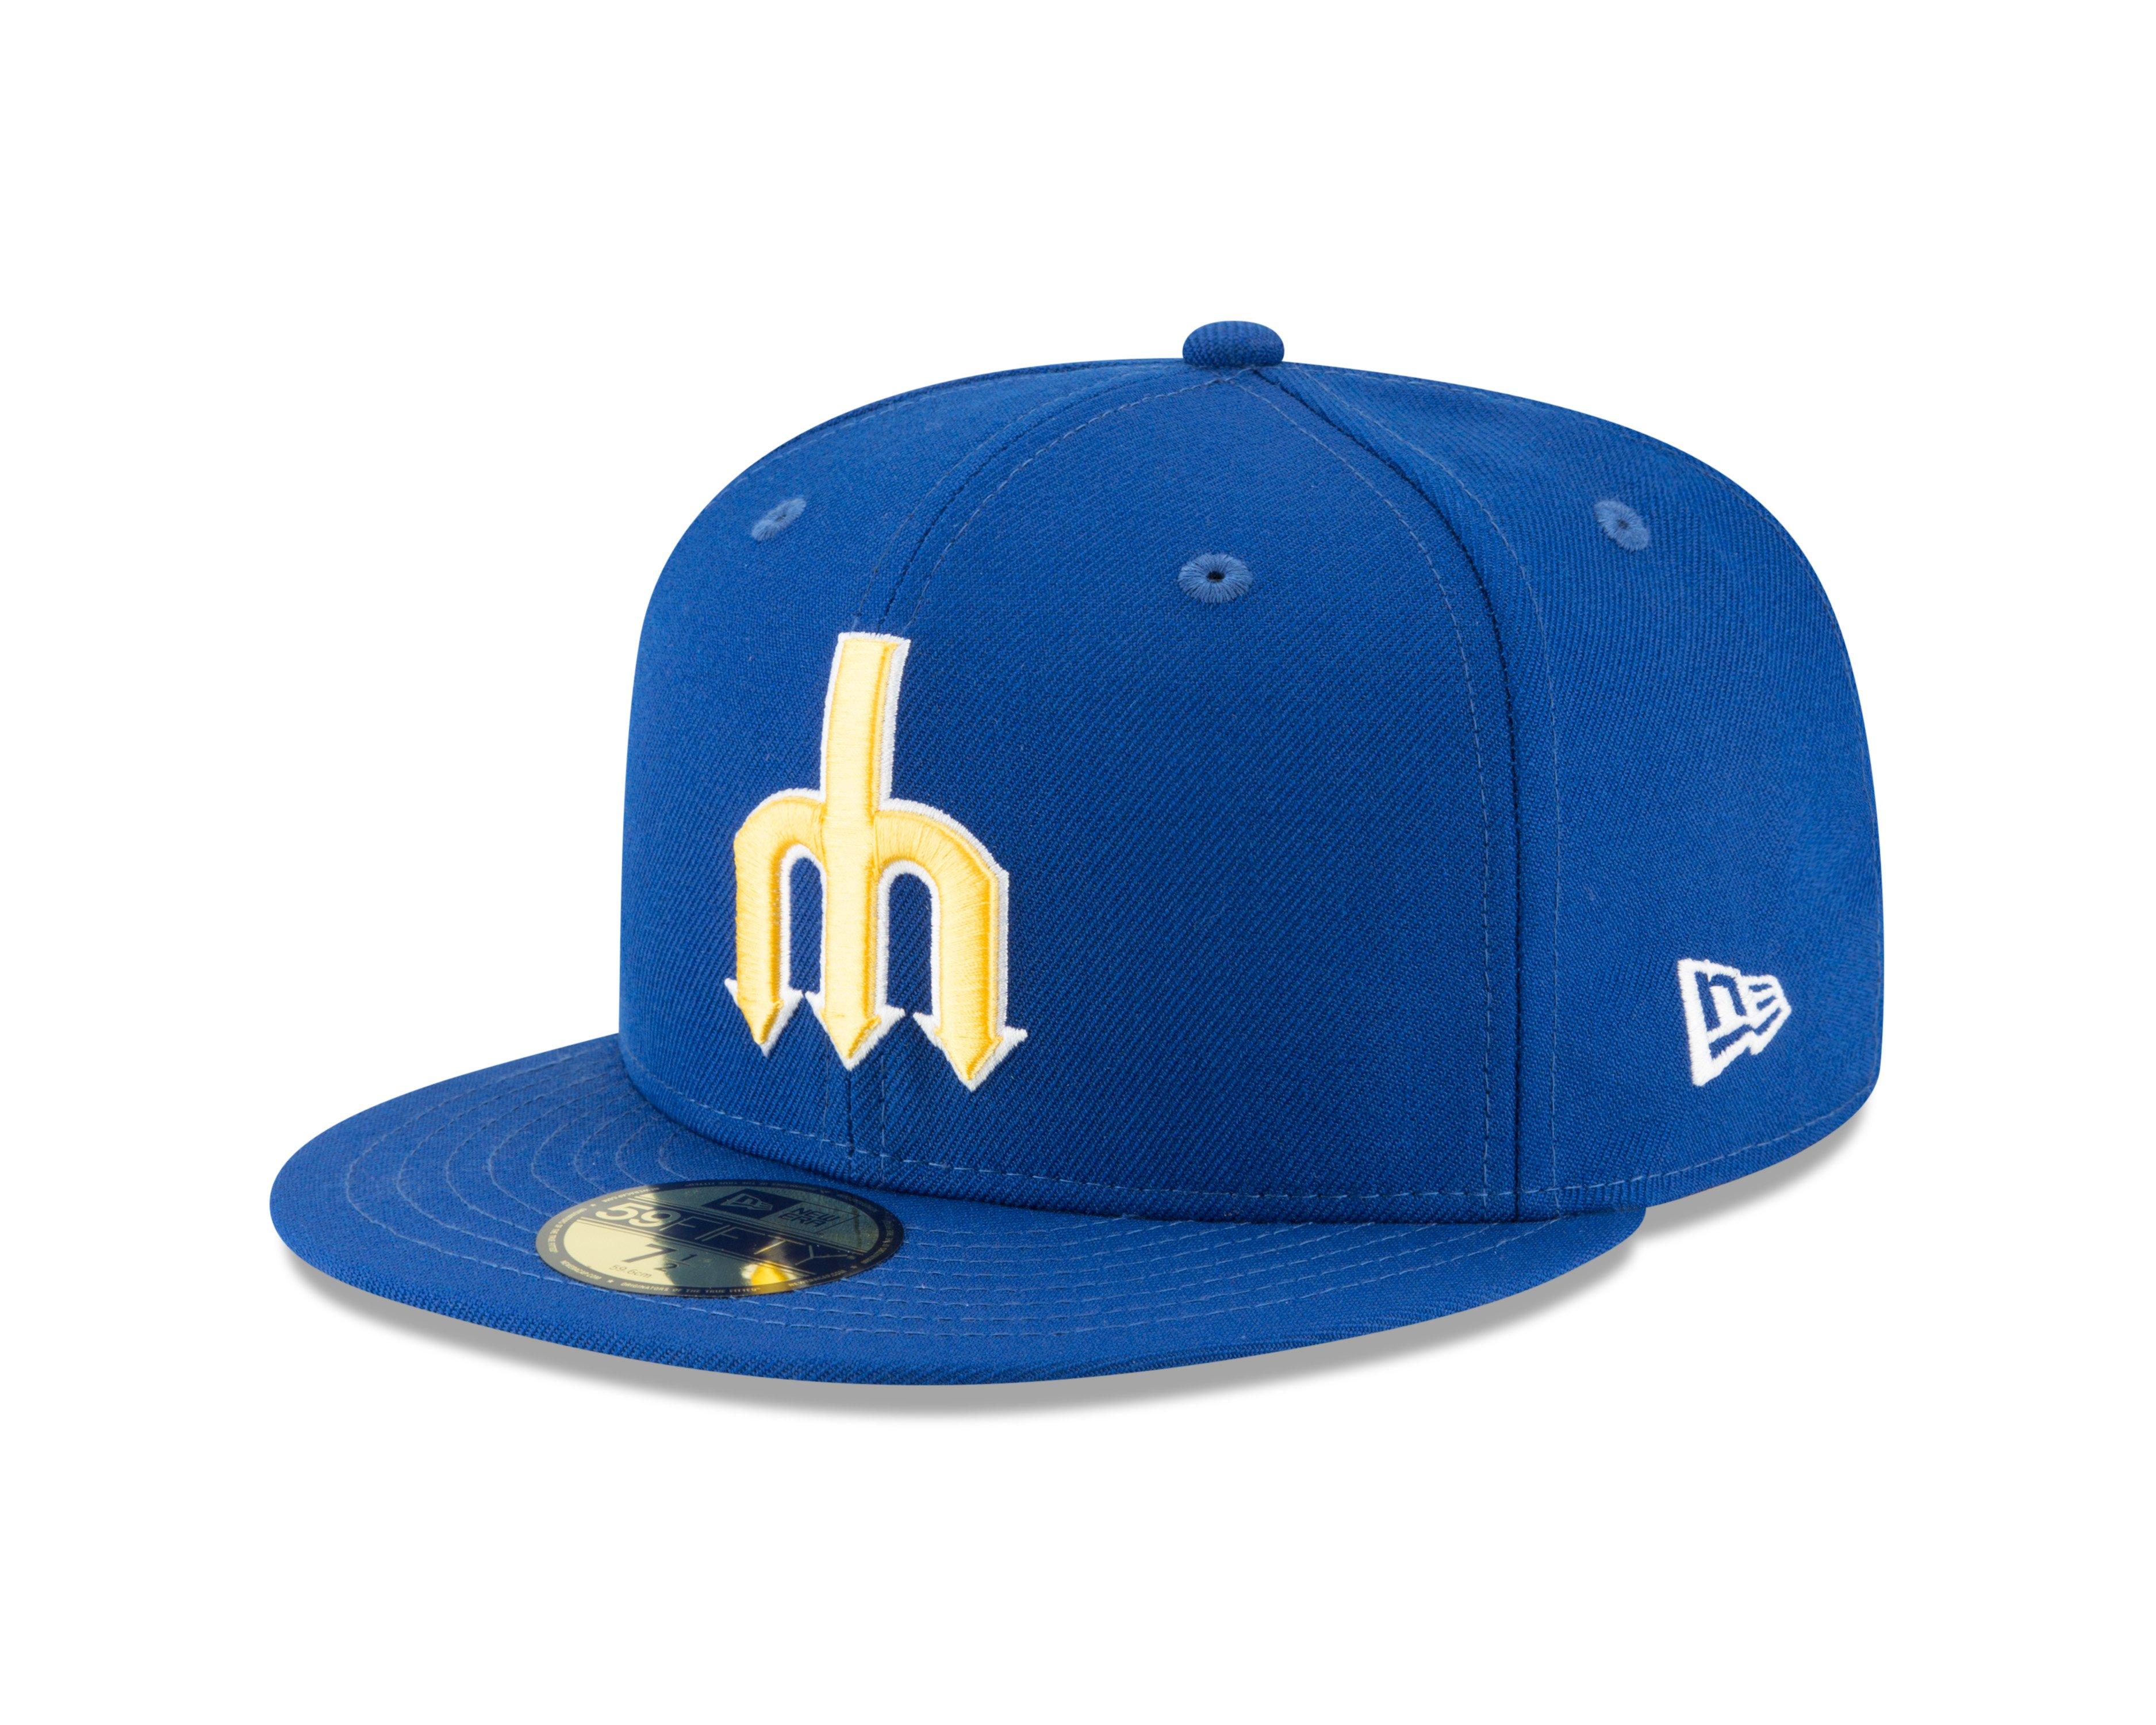 Seattle Mariners Pro Standard Cooperstown Collection Retro Classic